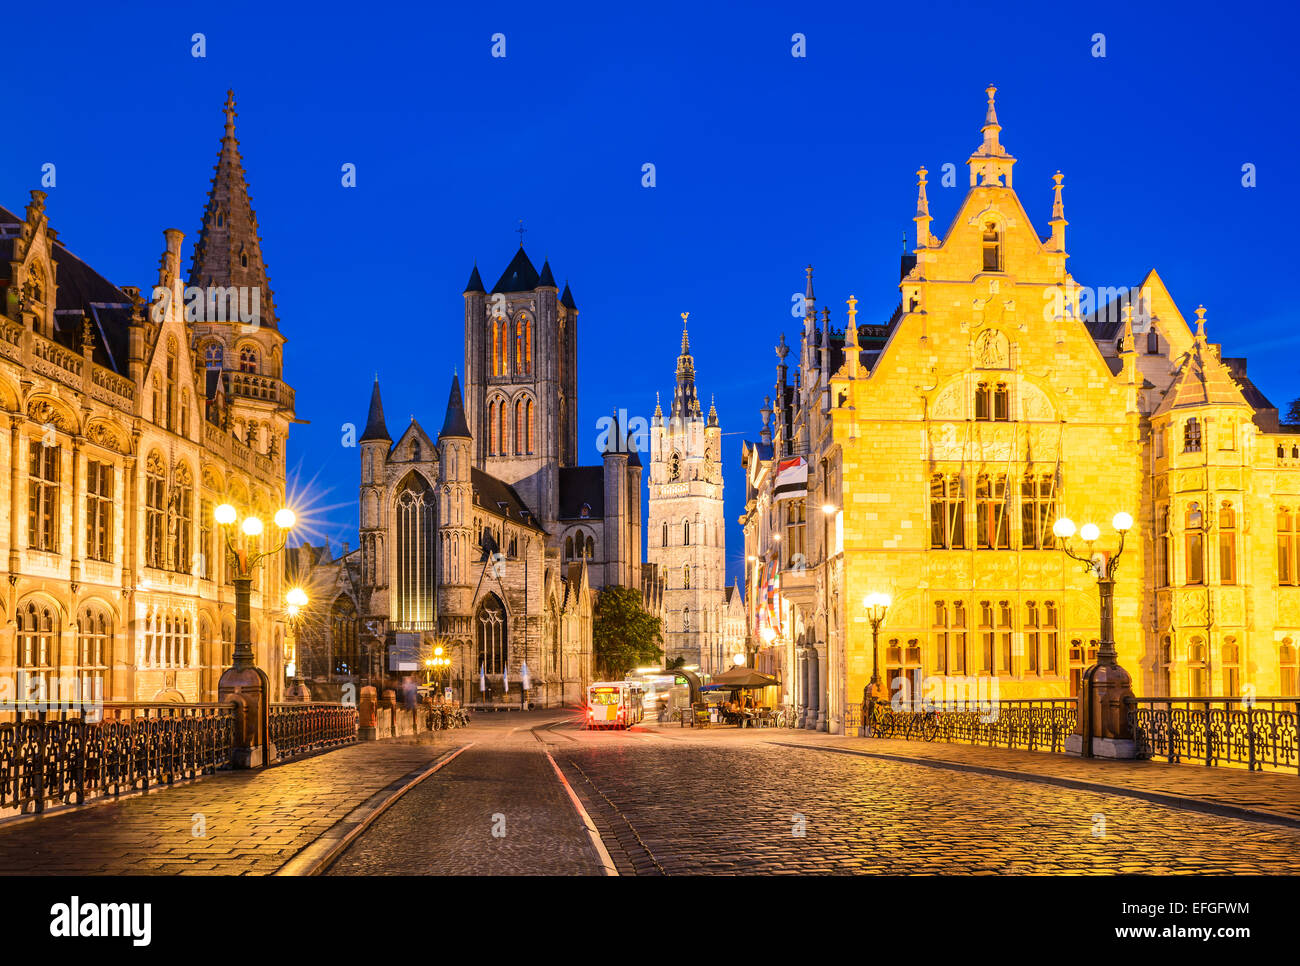 Night image of Saint Nicholas Church and Belfry tower, one of famous landmarks of Ghent, Gent in Flanders, Belgium. Stock Photo